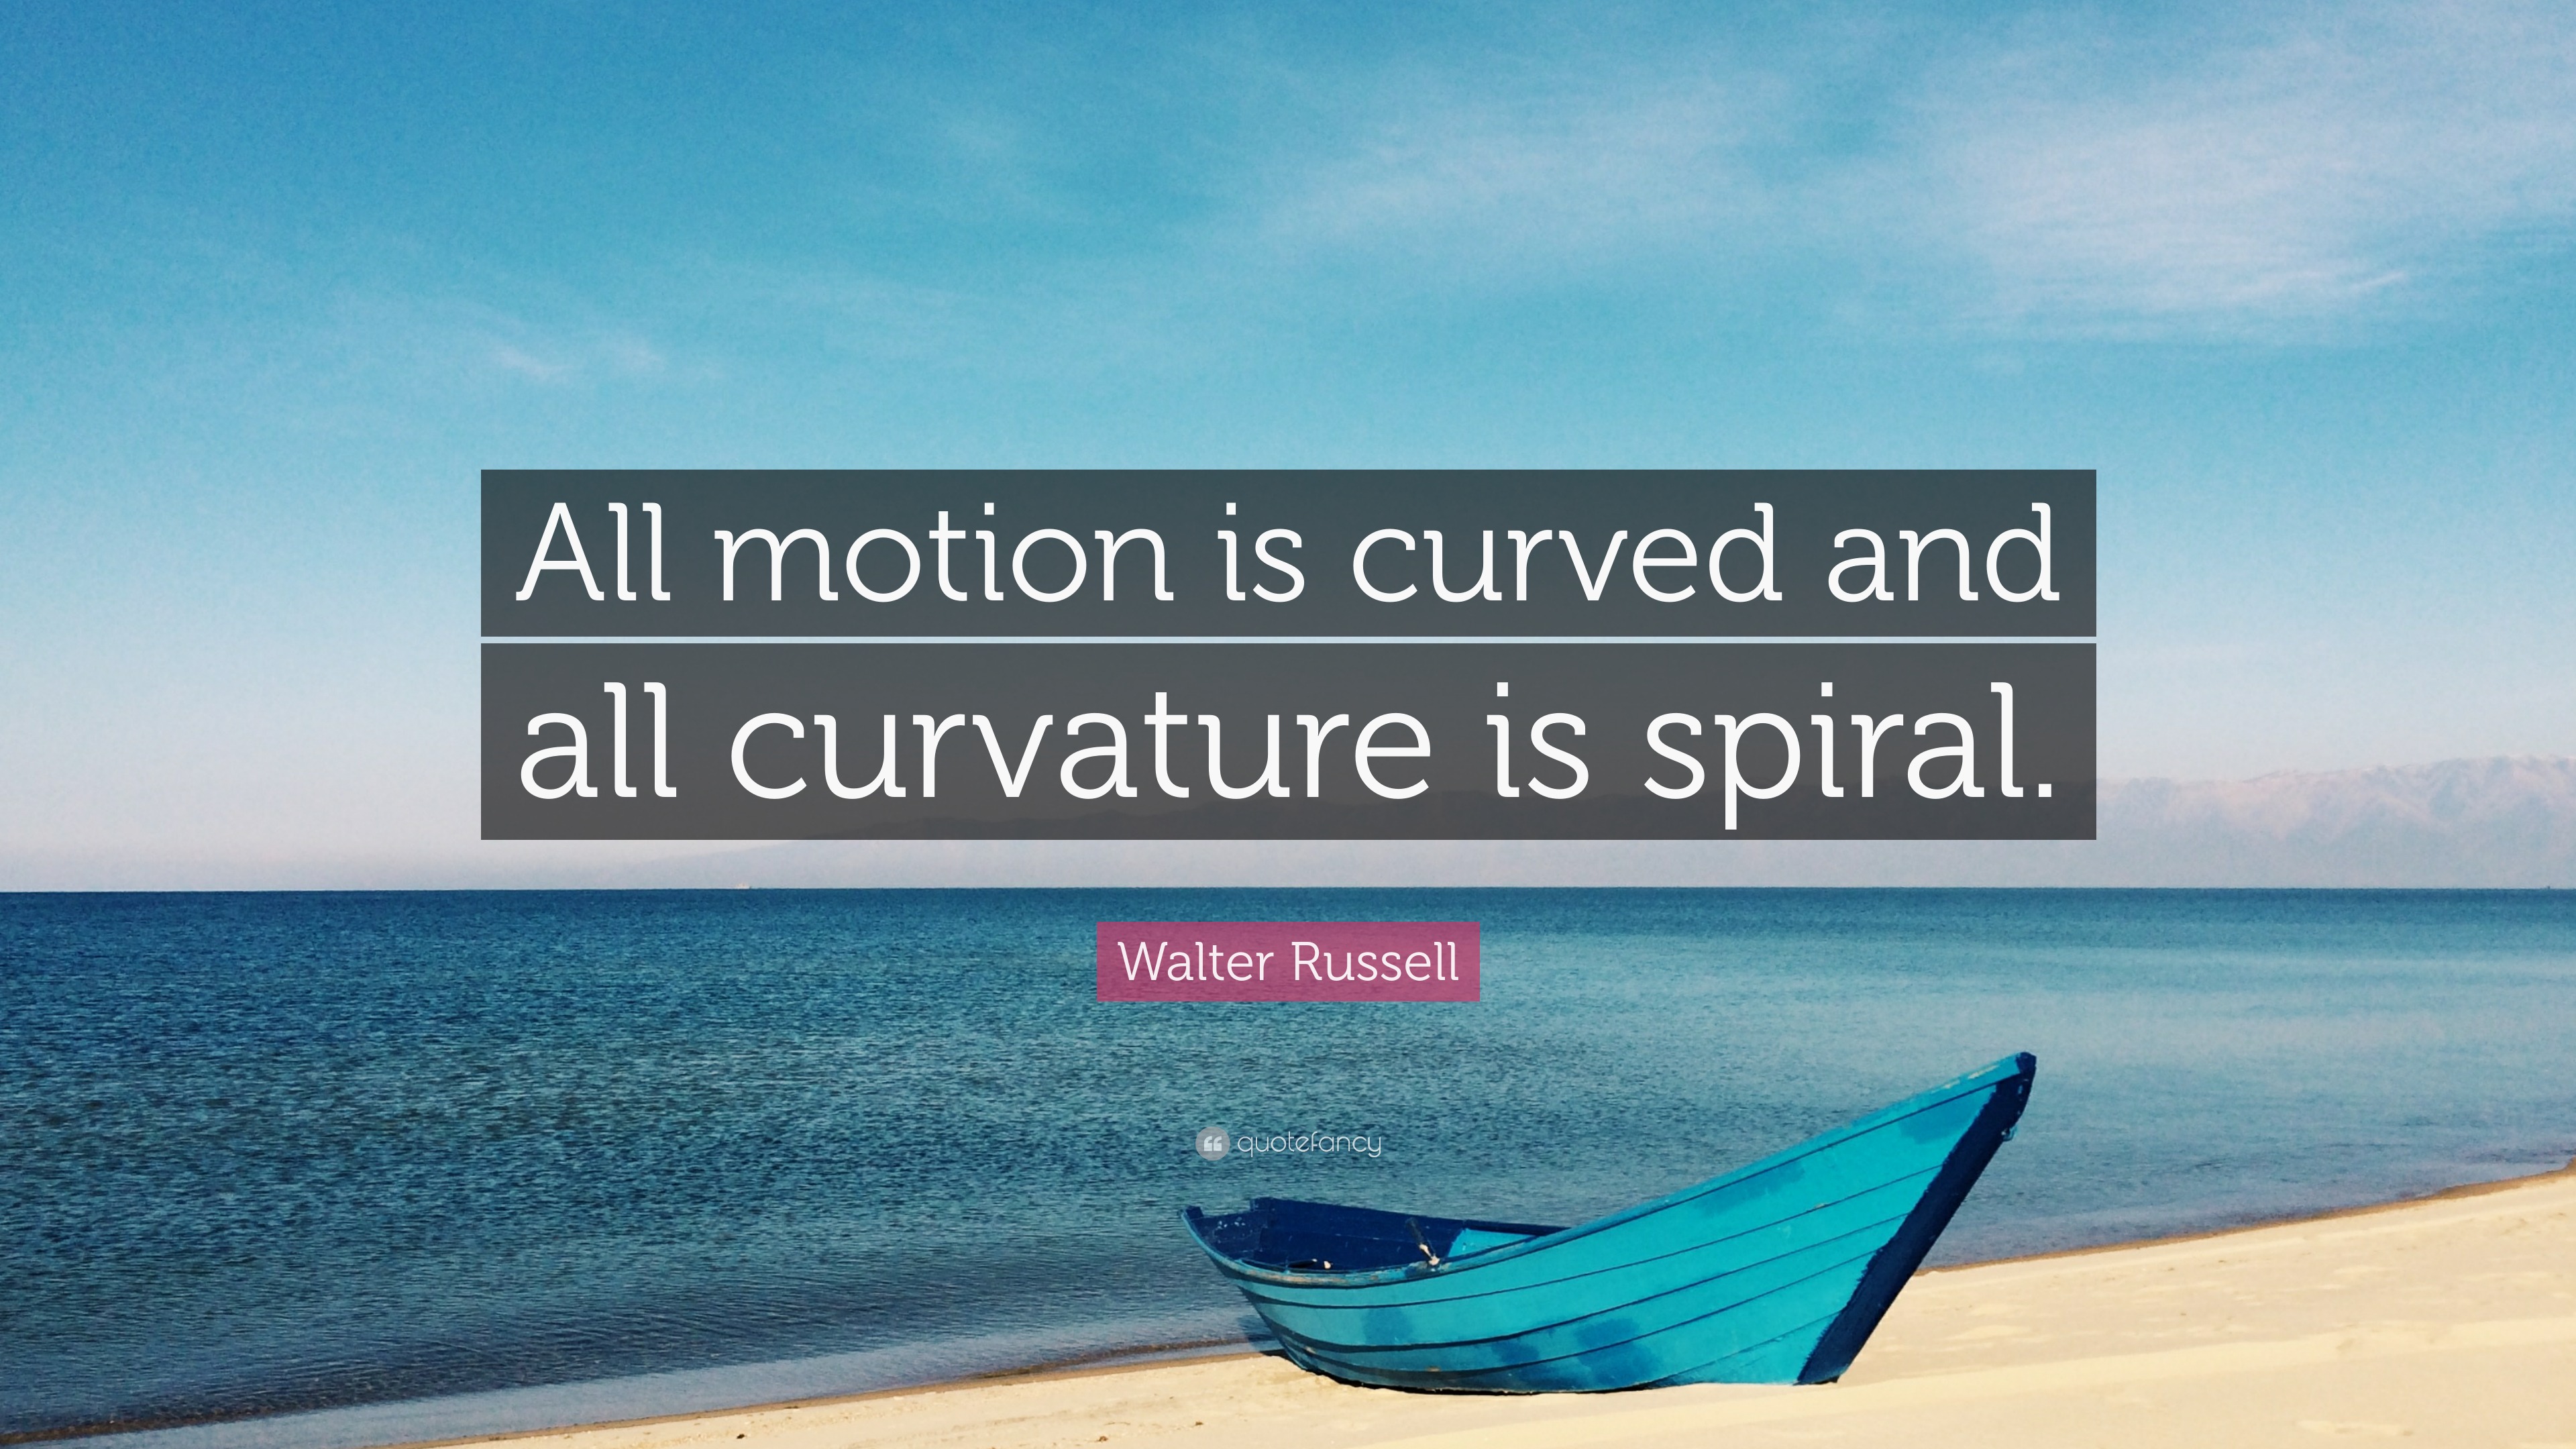 All motion is curved and all curvature is spiral : r/walterrussell